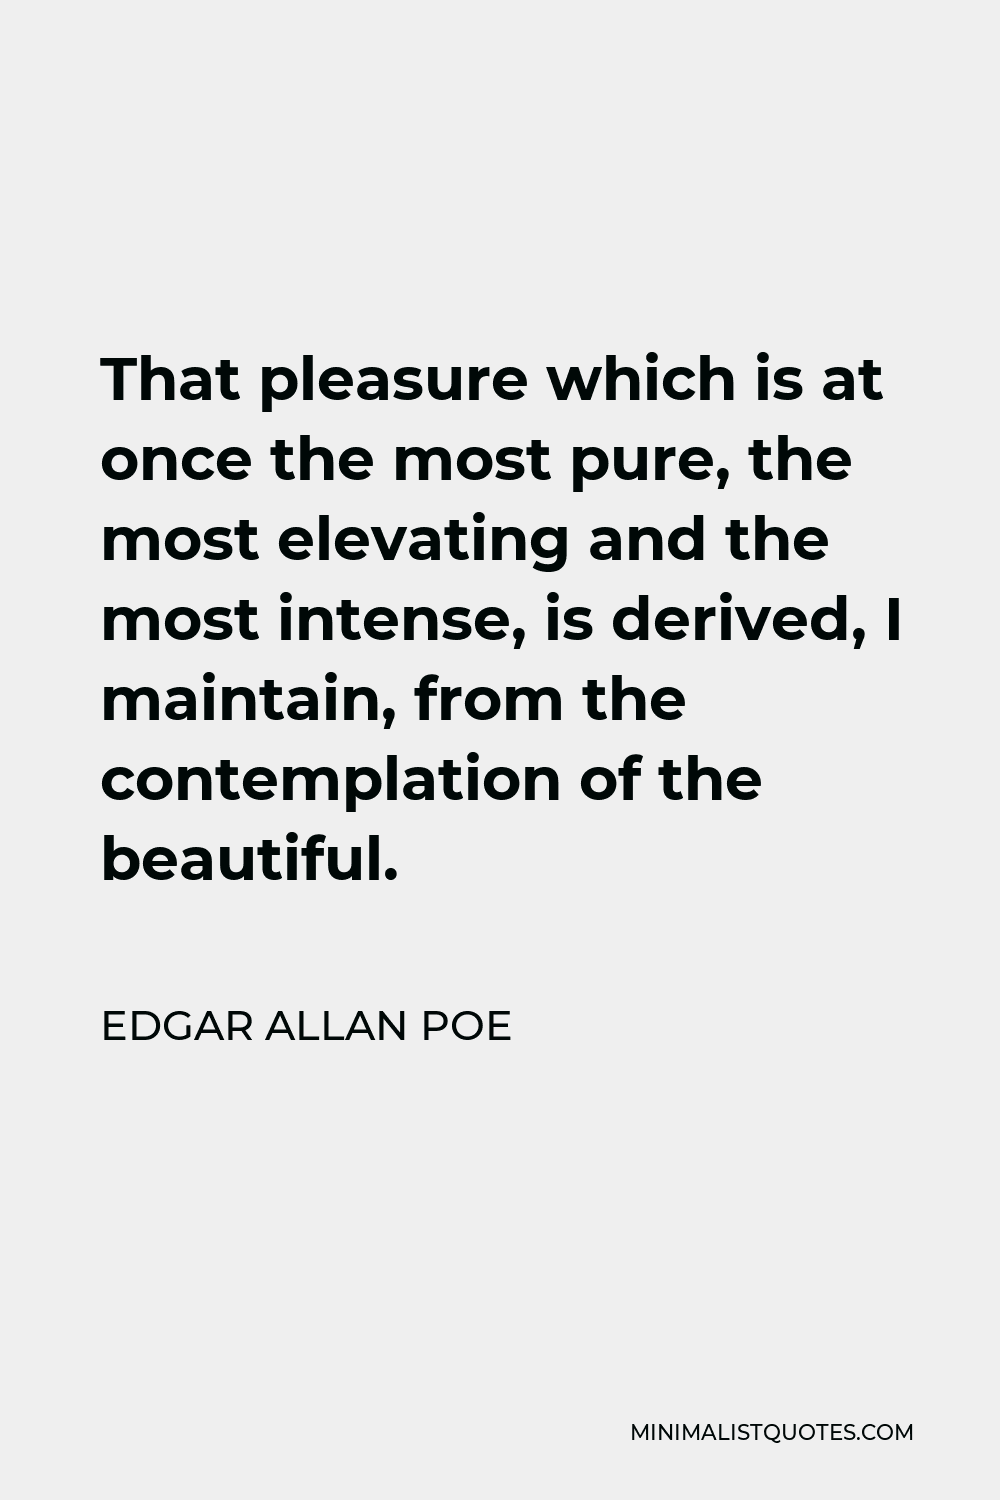 Edgar Allan Poe Quote - That pleasure which is at once the most pure, the most elevating and the most intense, is derived, I maintain, from the contemplation of the beautiful.